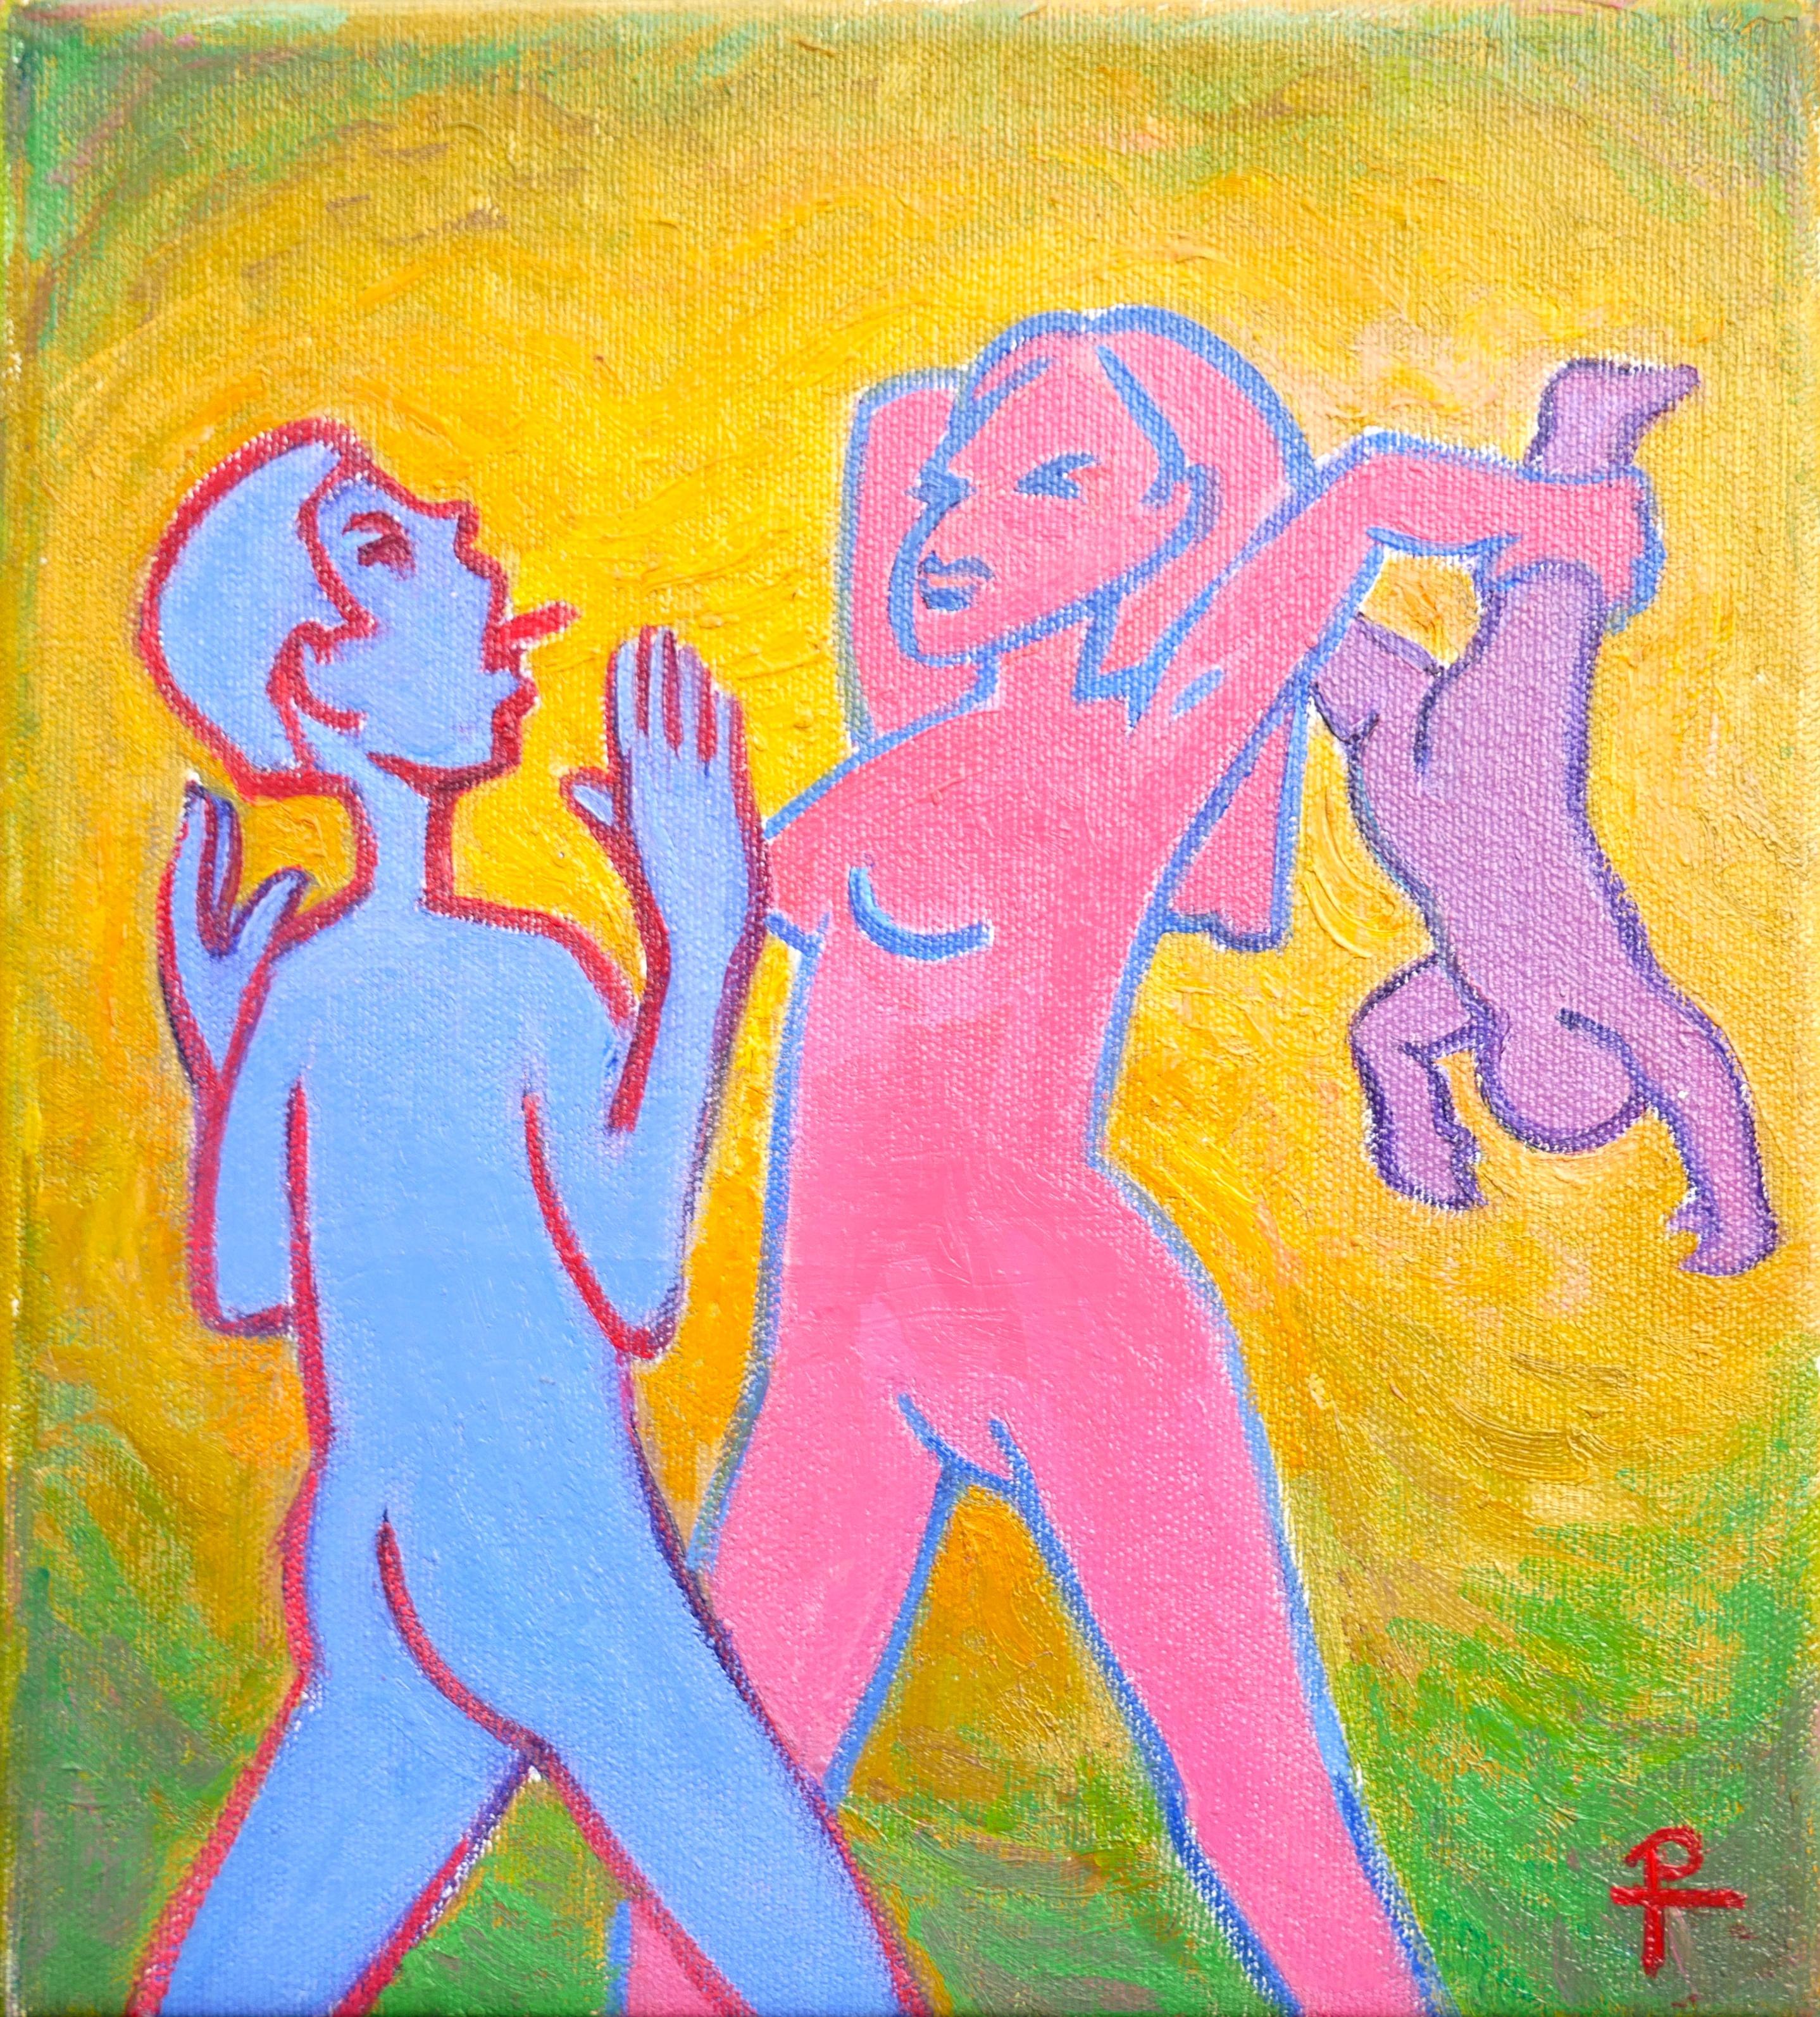 Henry David Potwin Abstract Painting - "Family Drama" Colorful Contemporary Pink and Blue Figurative Abstract